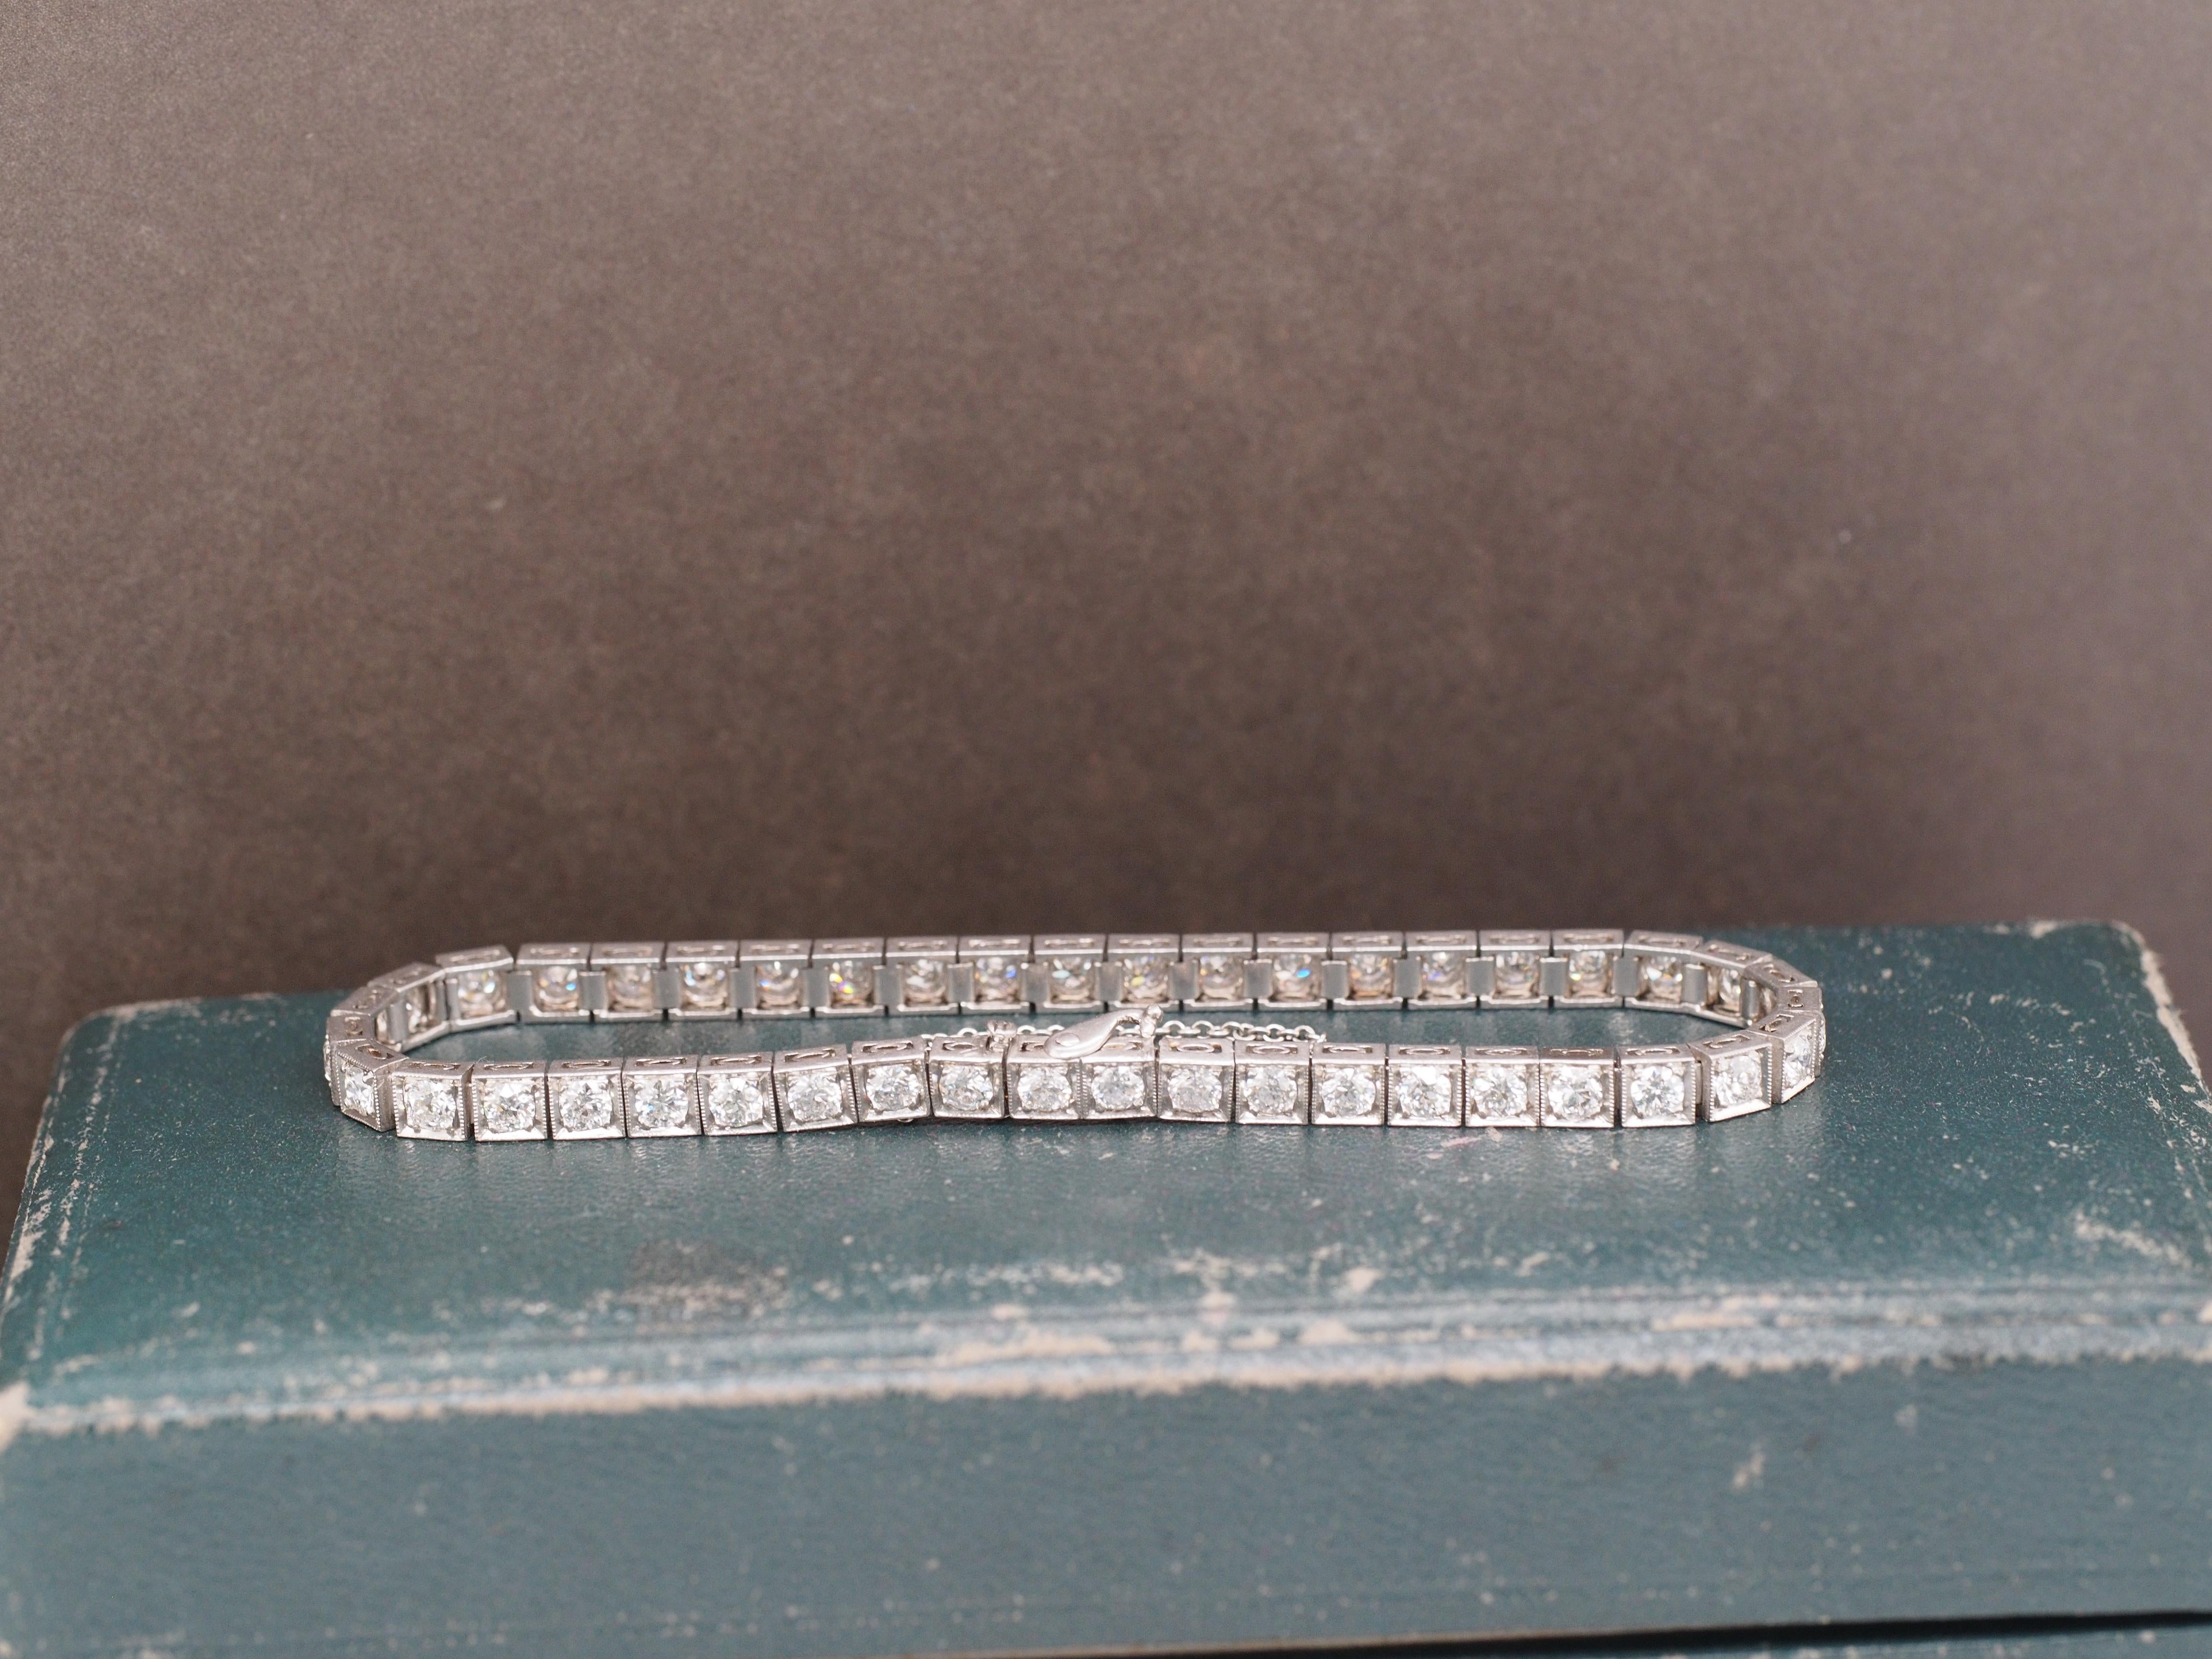 Year: 1920s
Item Details:
Metal Type: Platinum [Hallmarked, and Tested]
Weight: 18.1 grams (All Items Total)
Stone Details:
Type: Diamond (natural)
Weight: 4.25ct total weight
Cut: Old European Brilliant
Color: F/G
Clarity: VS
Bracelet Length